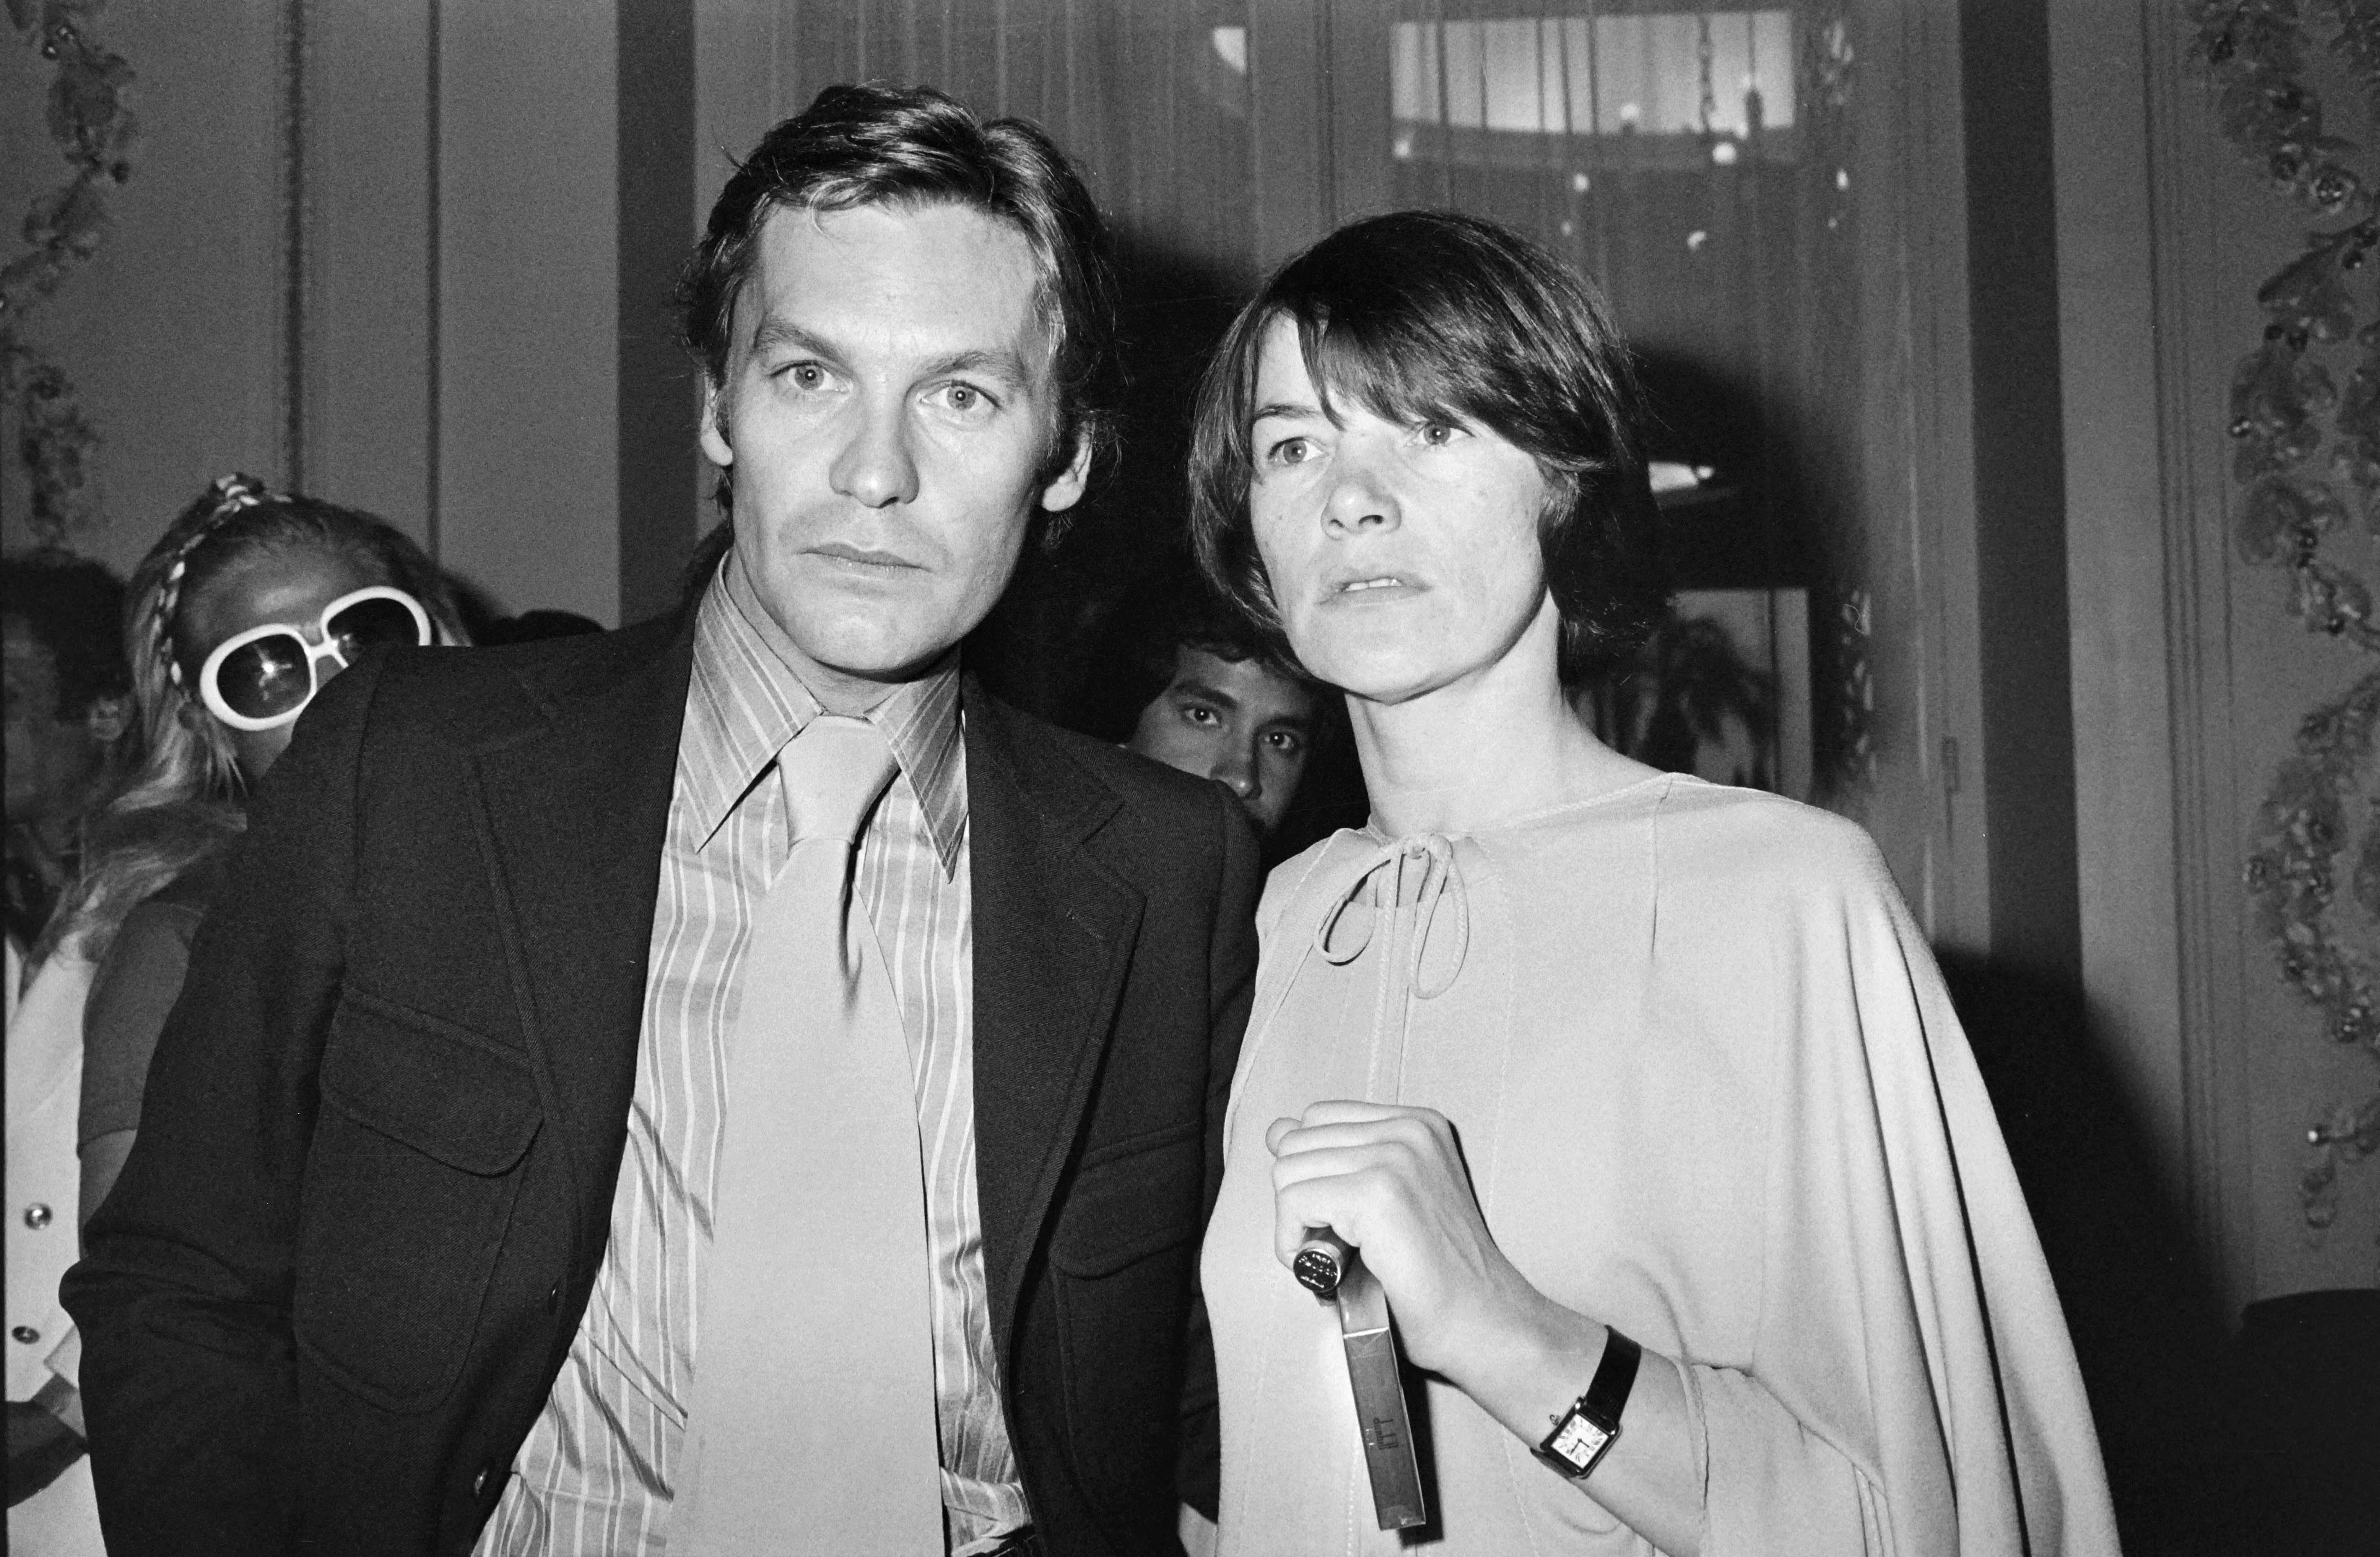 At the Cannes Film Festival with actor Helmut Berger in 1976